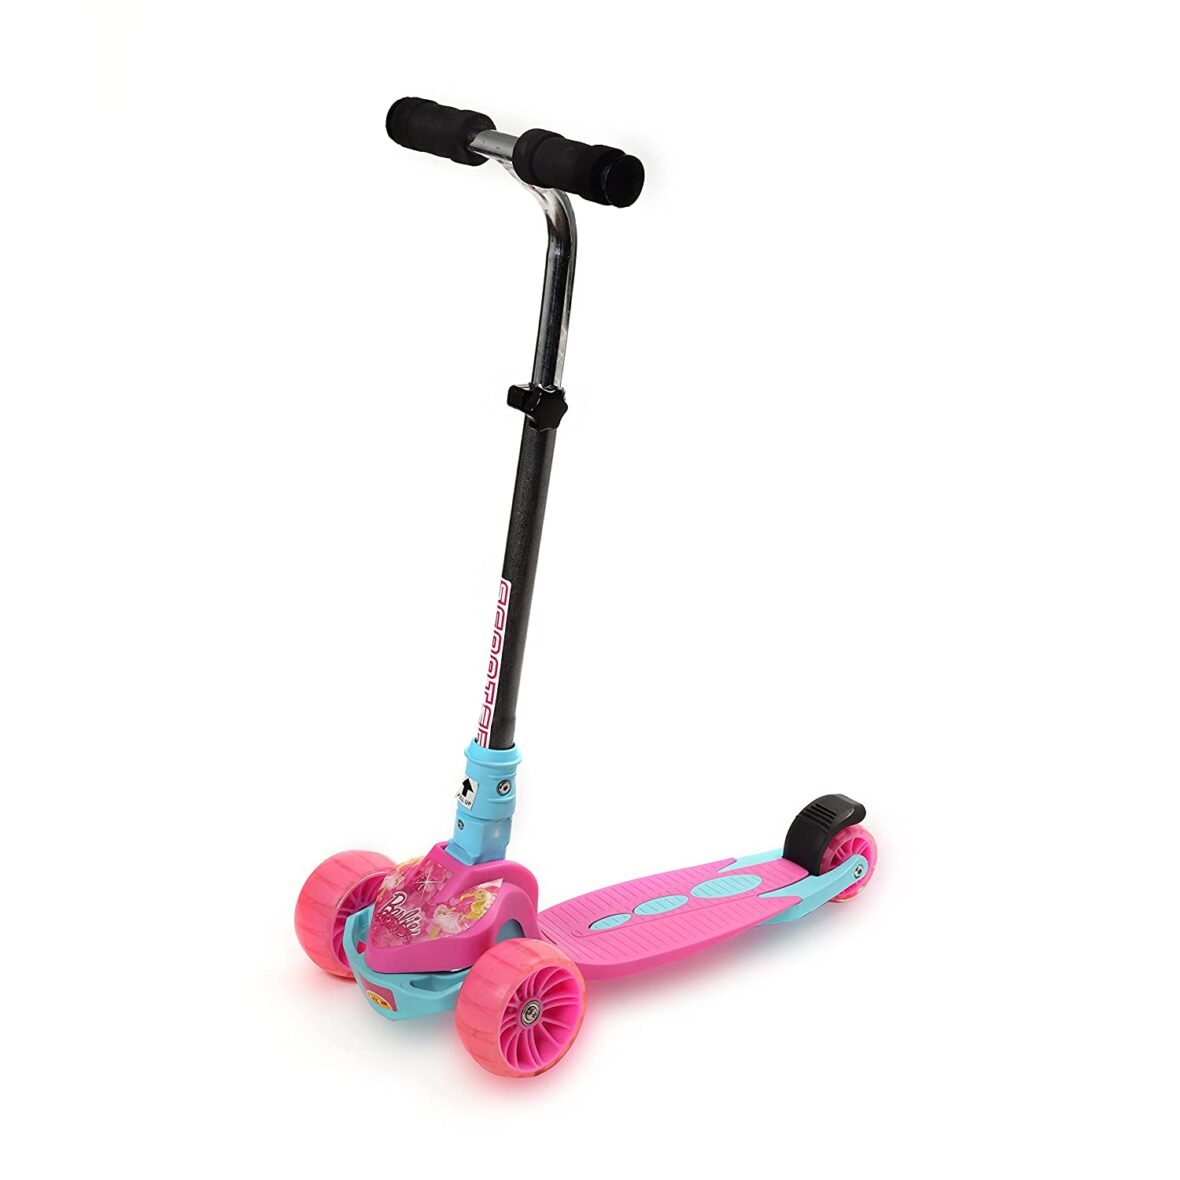 Toyzone Scooter Storm | Kids Skate Ride on | Smart Kick Scooter | Adjustable Height and Rear Brake | Foldable Scooter | for Kids Age 6+ Years